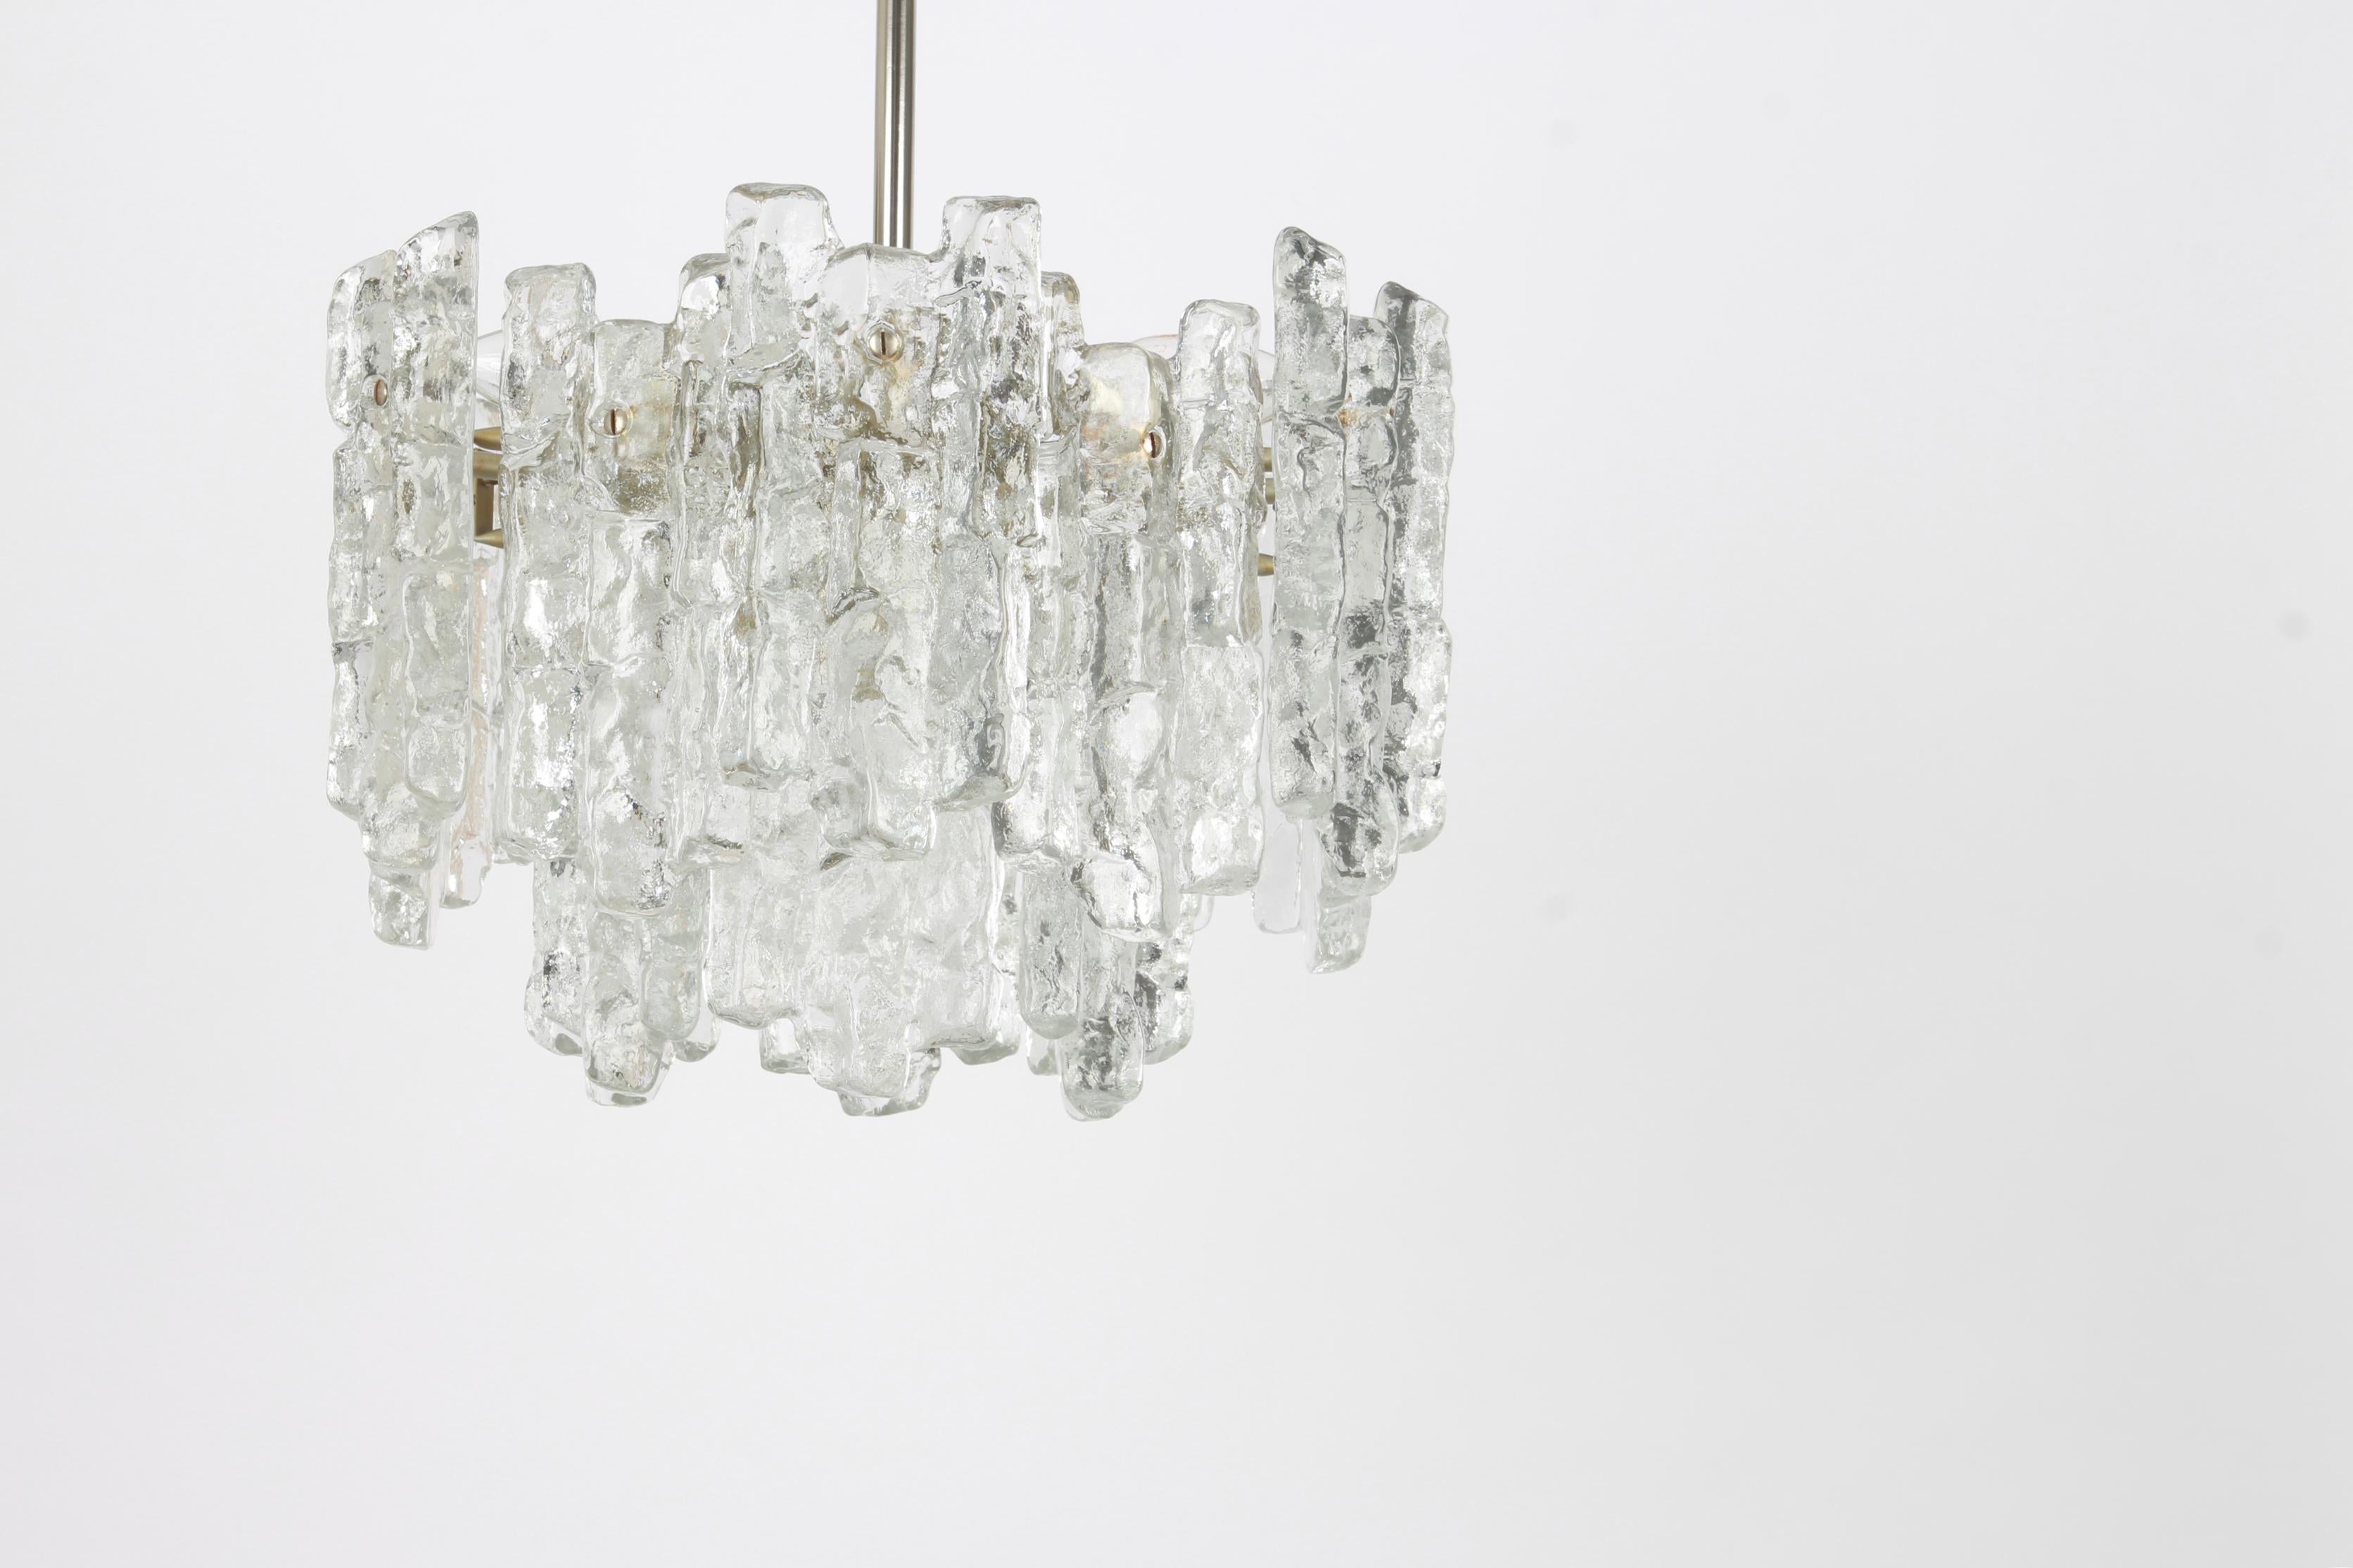 Stunning Murano glass chandelier by Kalmar, 1960s
Two tiers structure gathering 18 structured glasses, beautifully refracting the light very heavy quality.
High quality and in very good condition. Cleaned, well-wired and ready to use.
The fixture